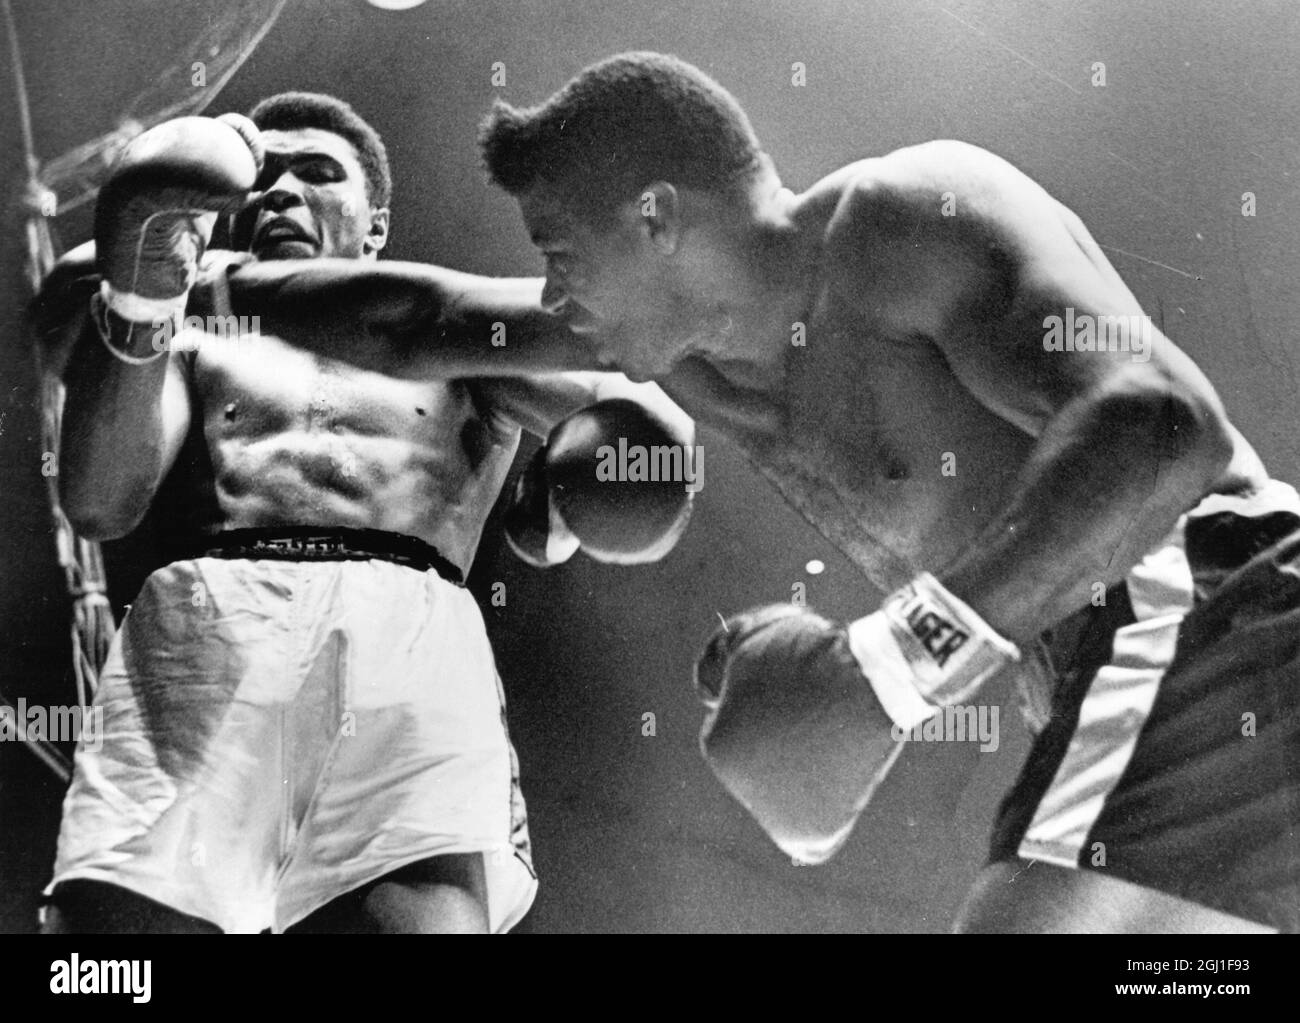 (Muhammad Ali) Cassius Clay in the boxing ring with Floyd Patterson 1965 Stock Photo